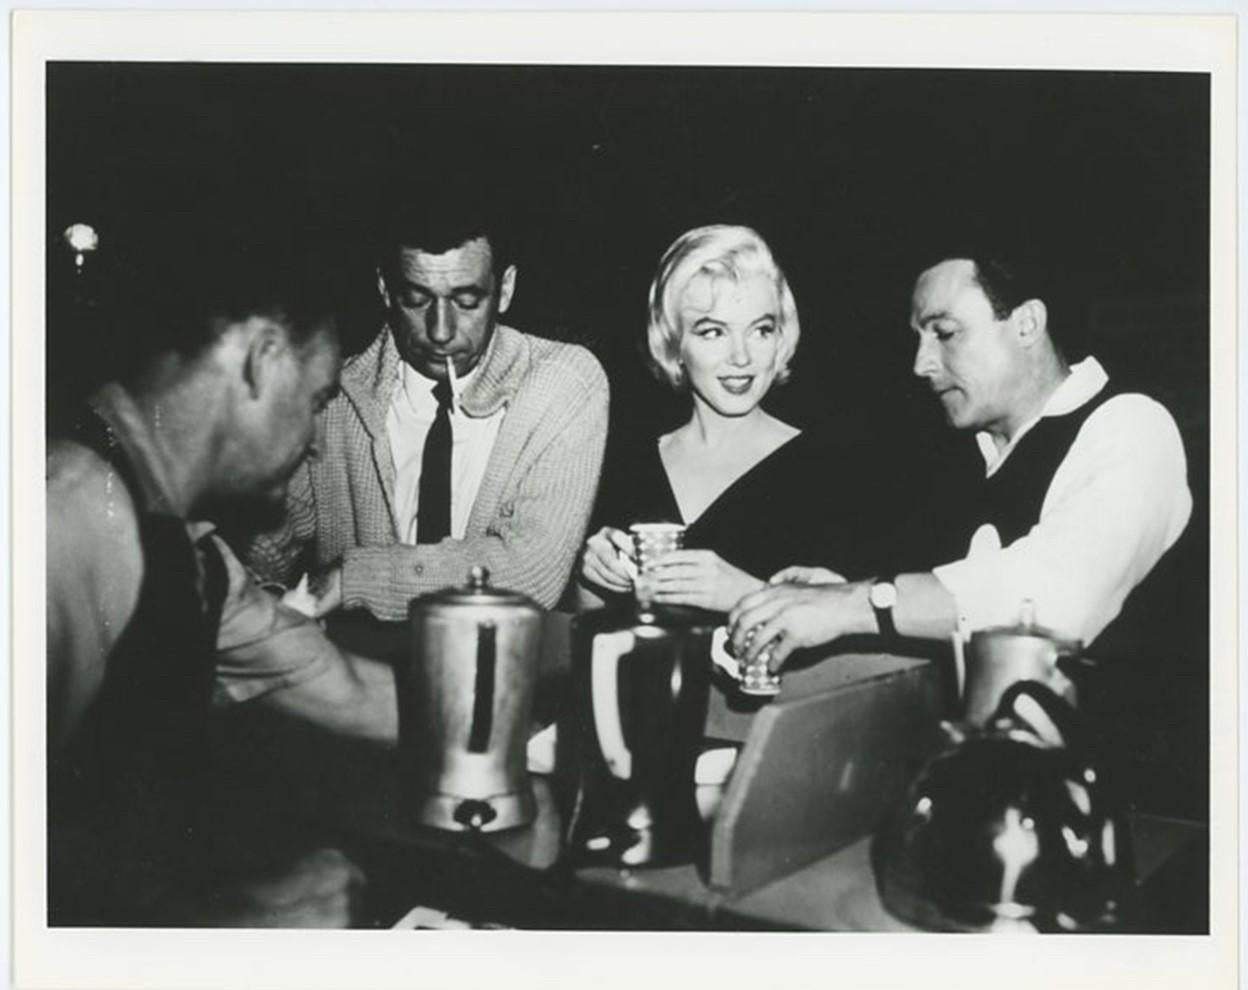 Unknown Black and White Photograph - Marilyn Monroe and Yves Montand in "Let's Make Love" 1960